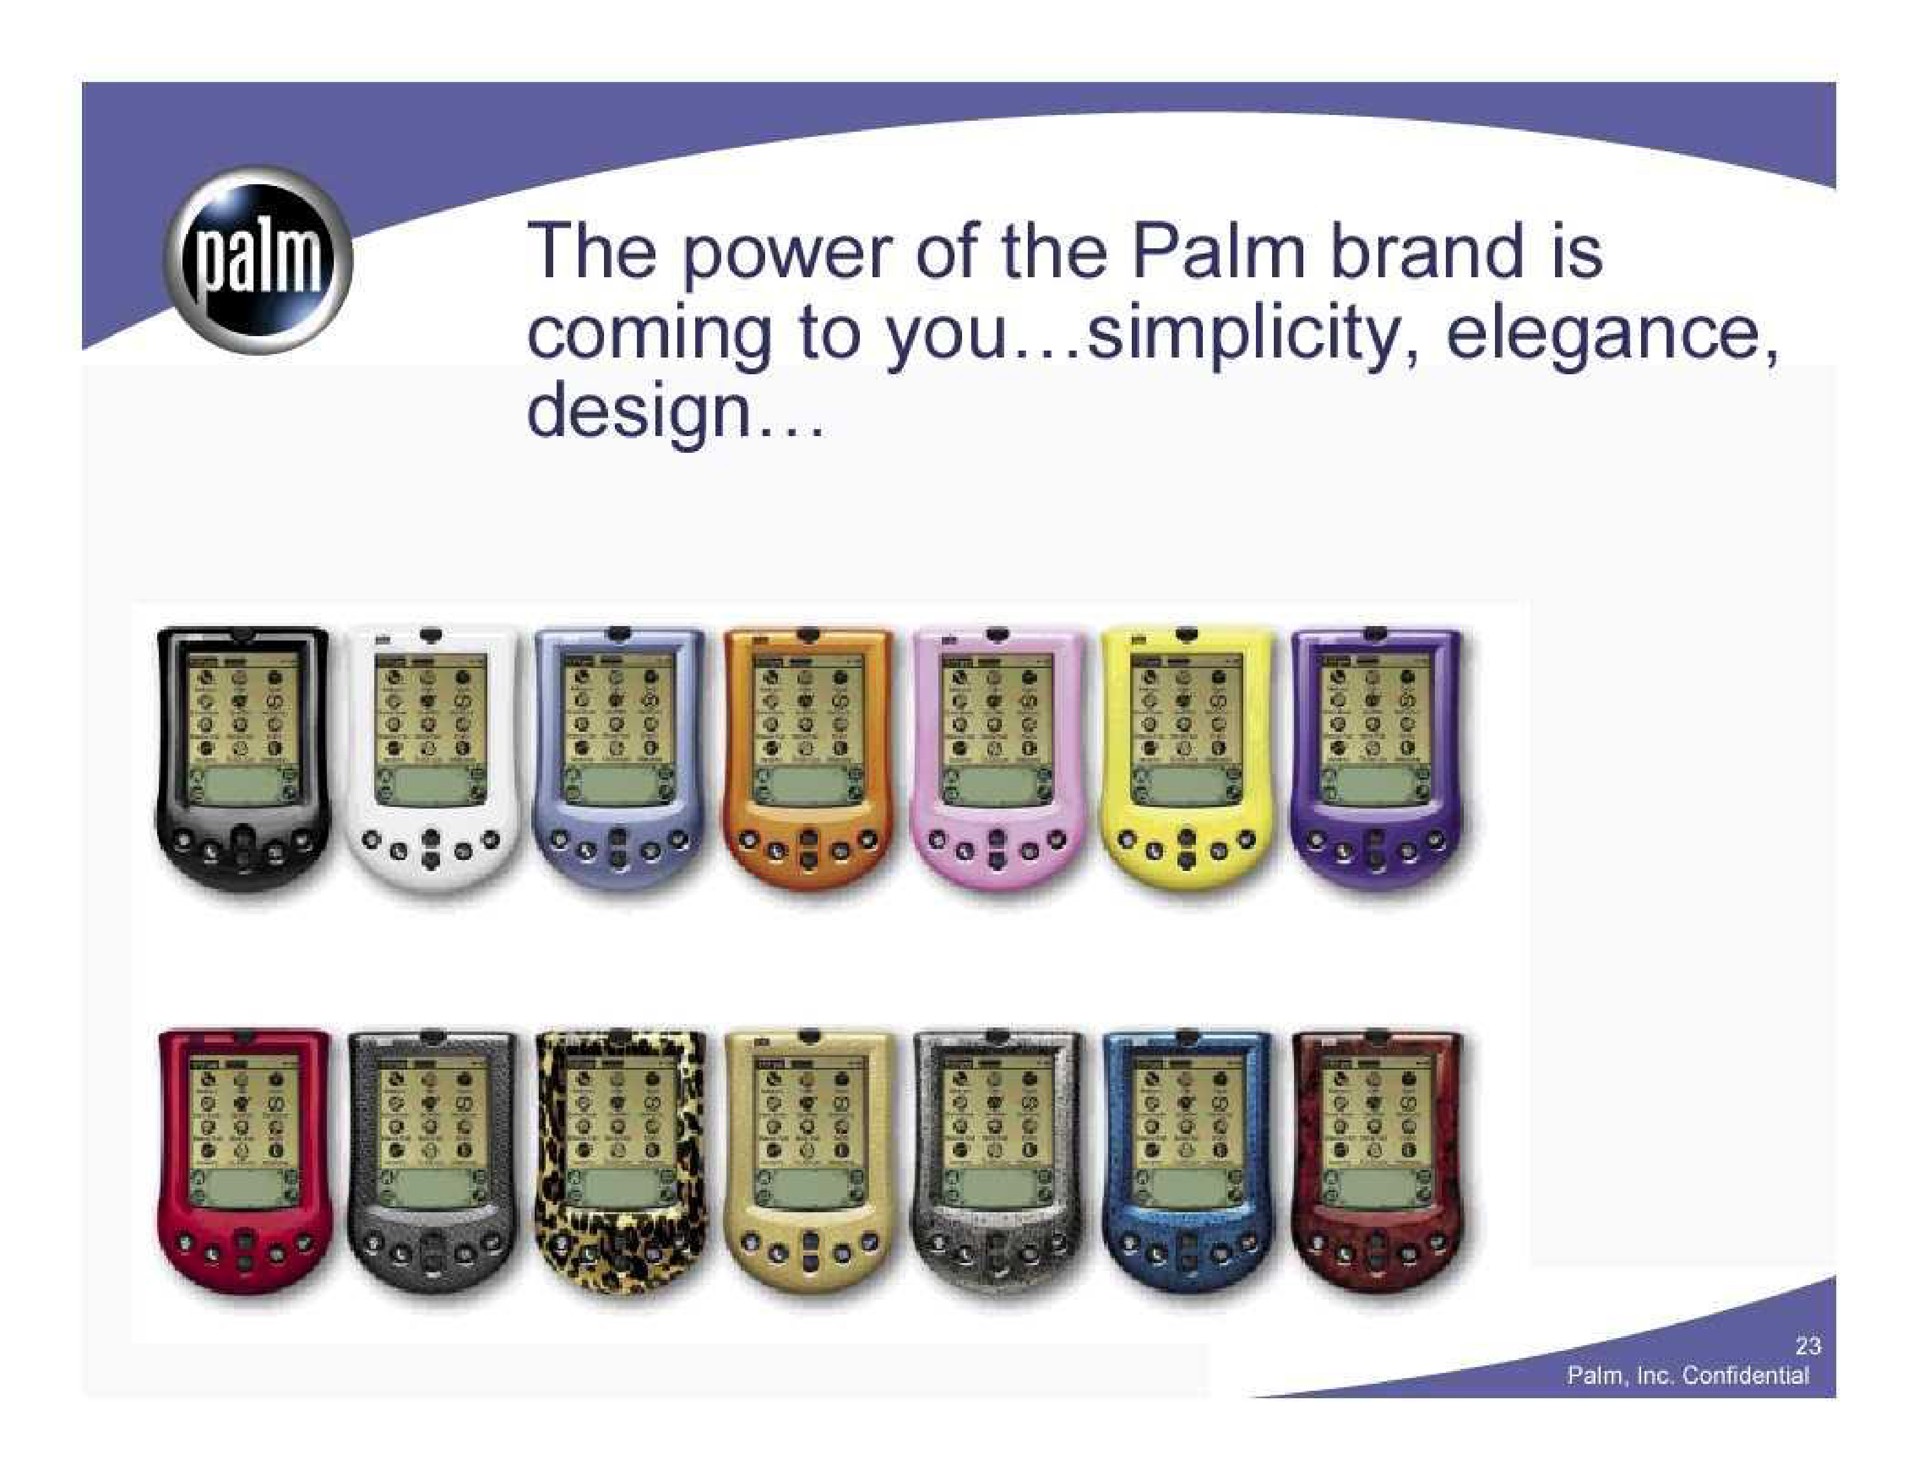 the power of the palm brand is coming to you simplicity elegance design | Palm Inc.